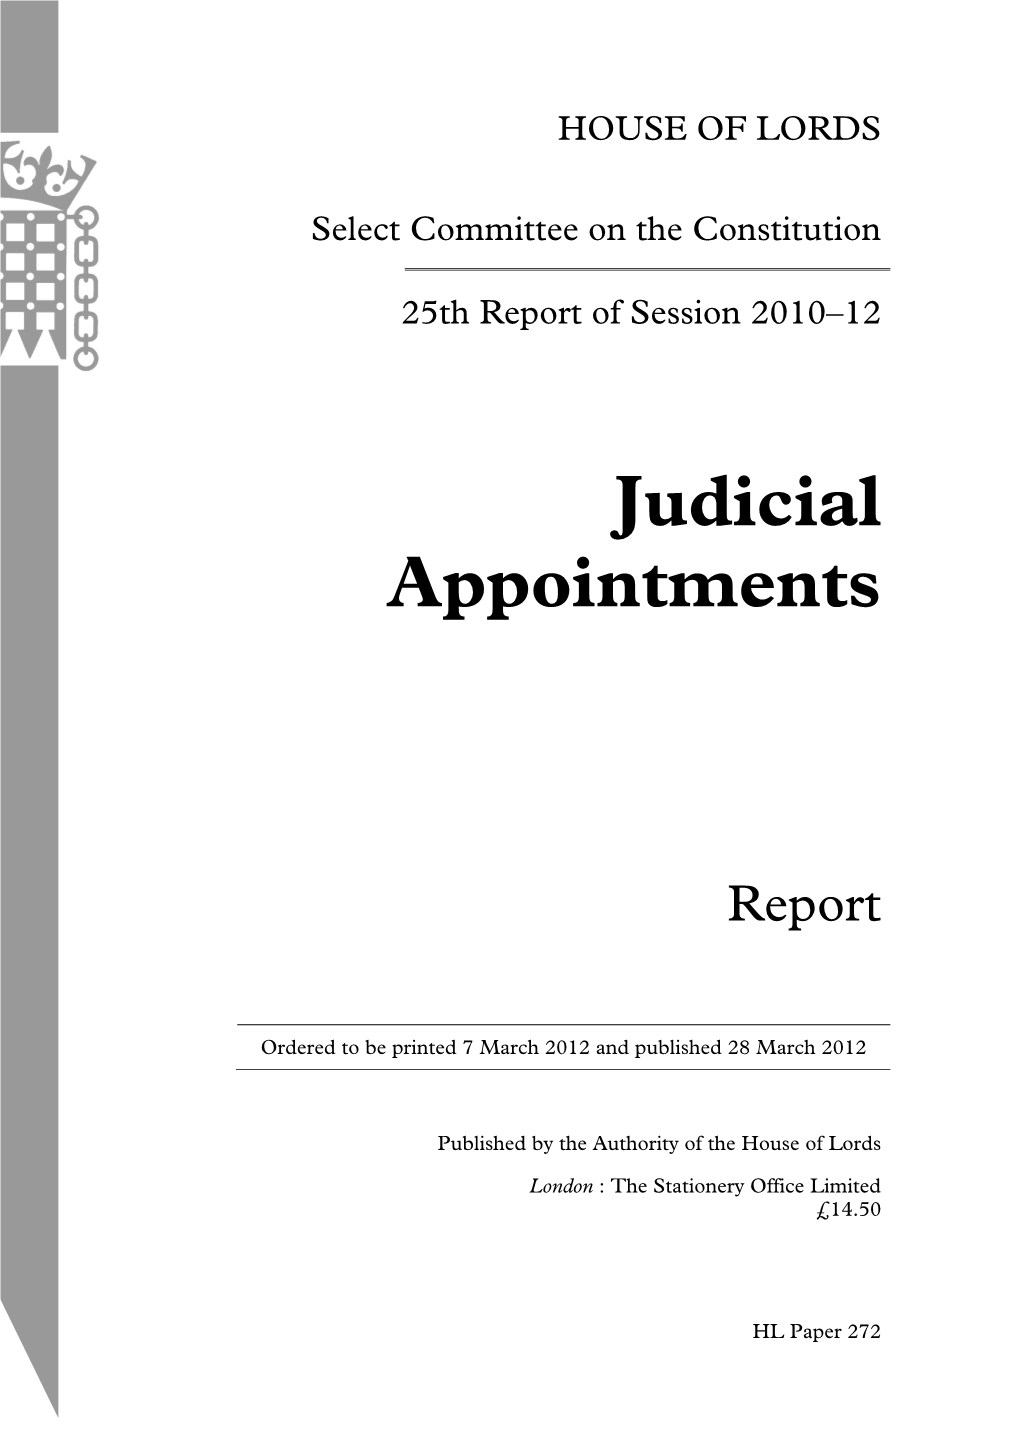 Judicial Appointments